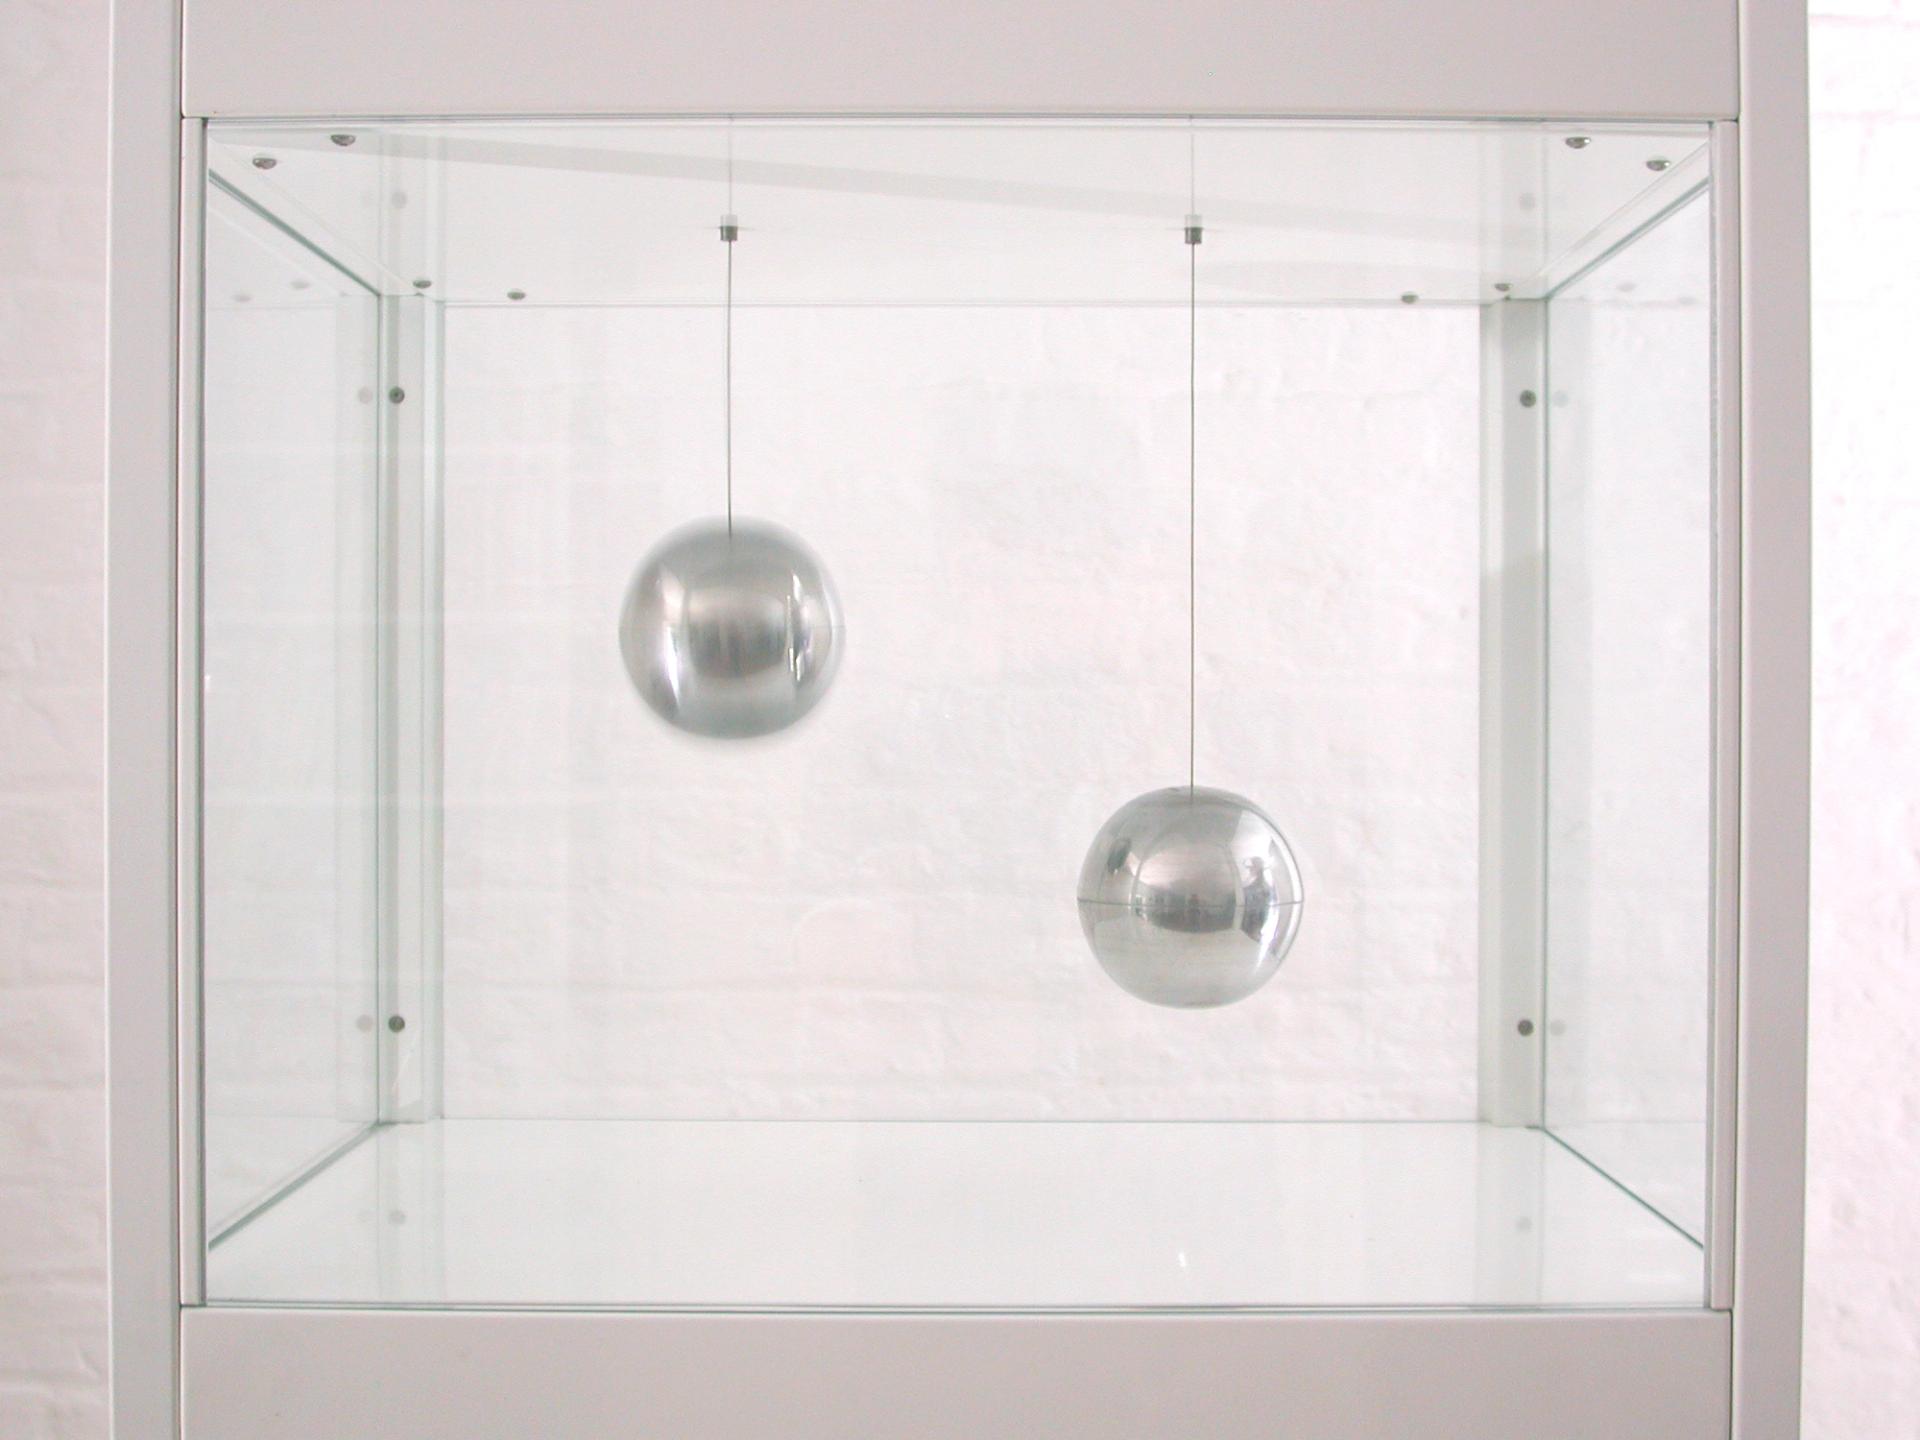 Large glass vitrine with white steel frame and two suspended shiny aluminium spheres